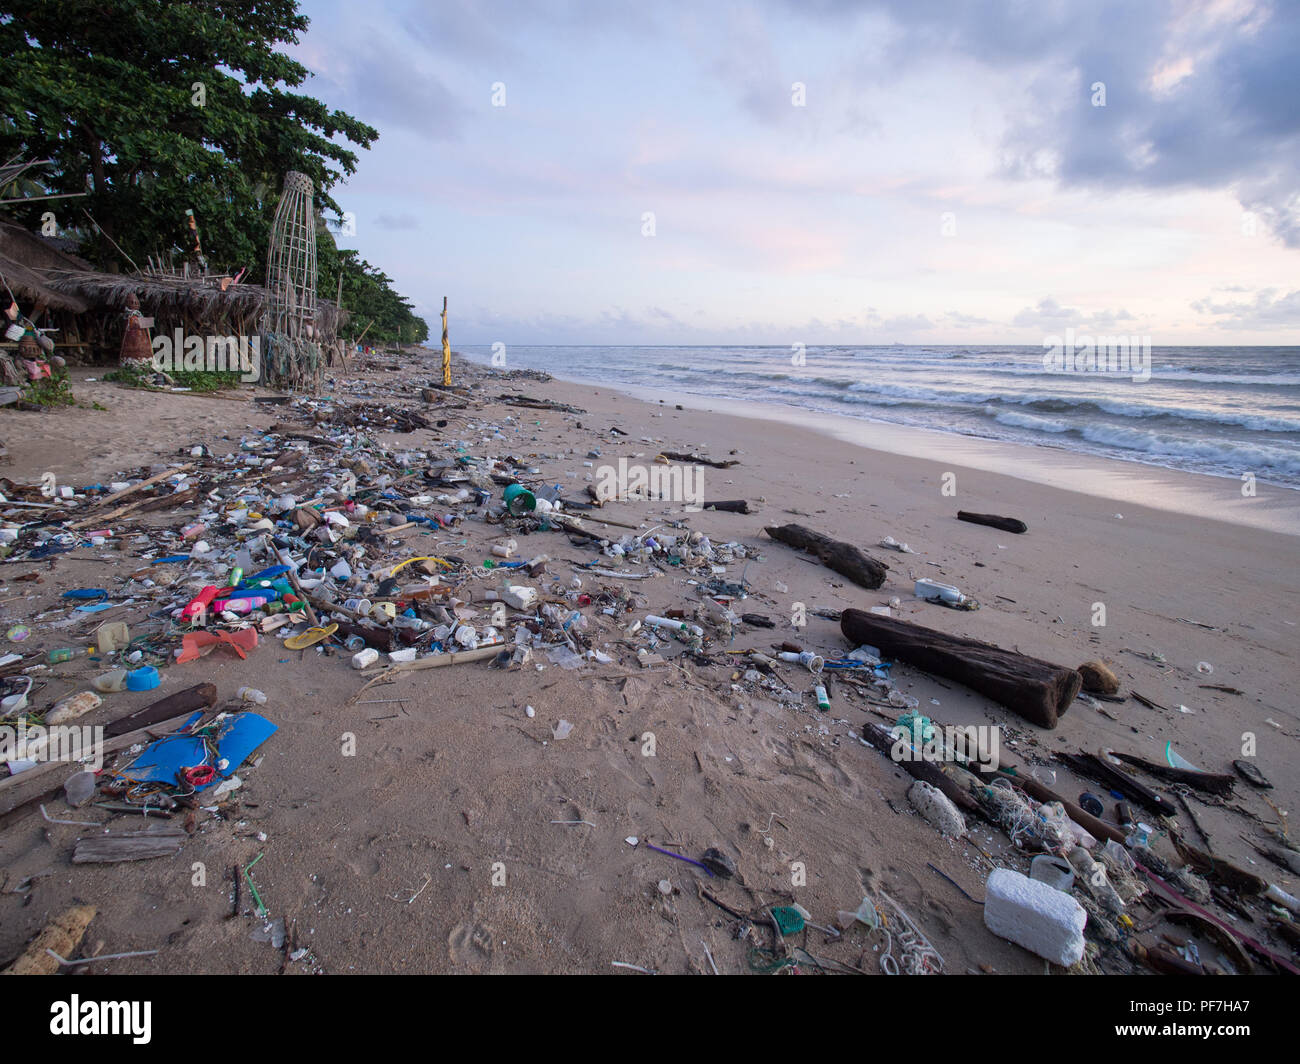 Marine debris washed up on a beach in Thailand Stock Photo